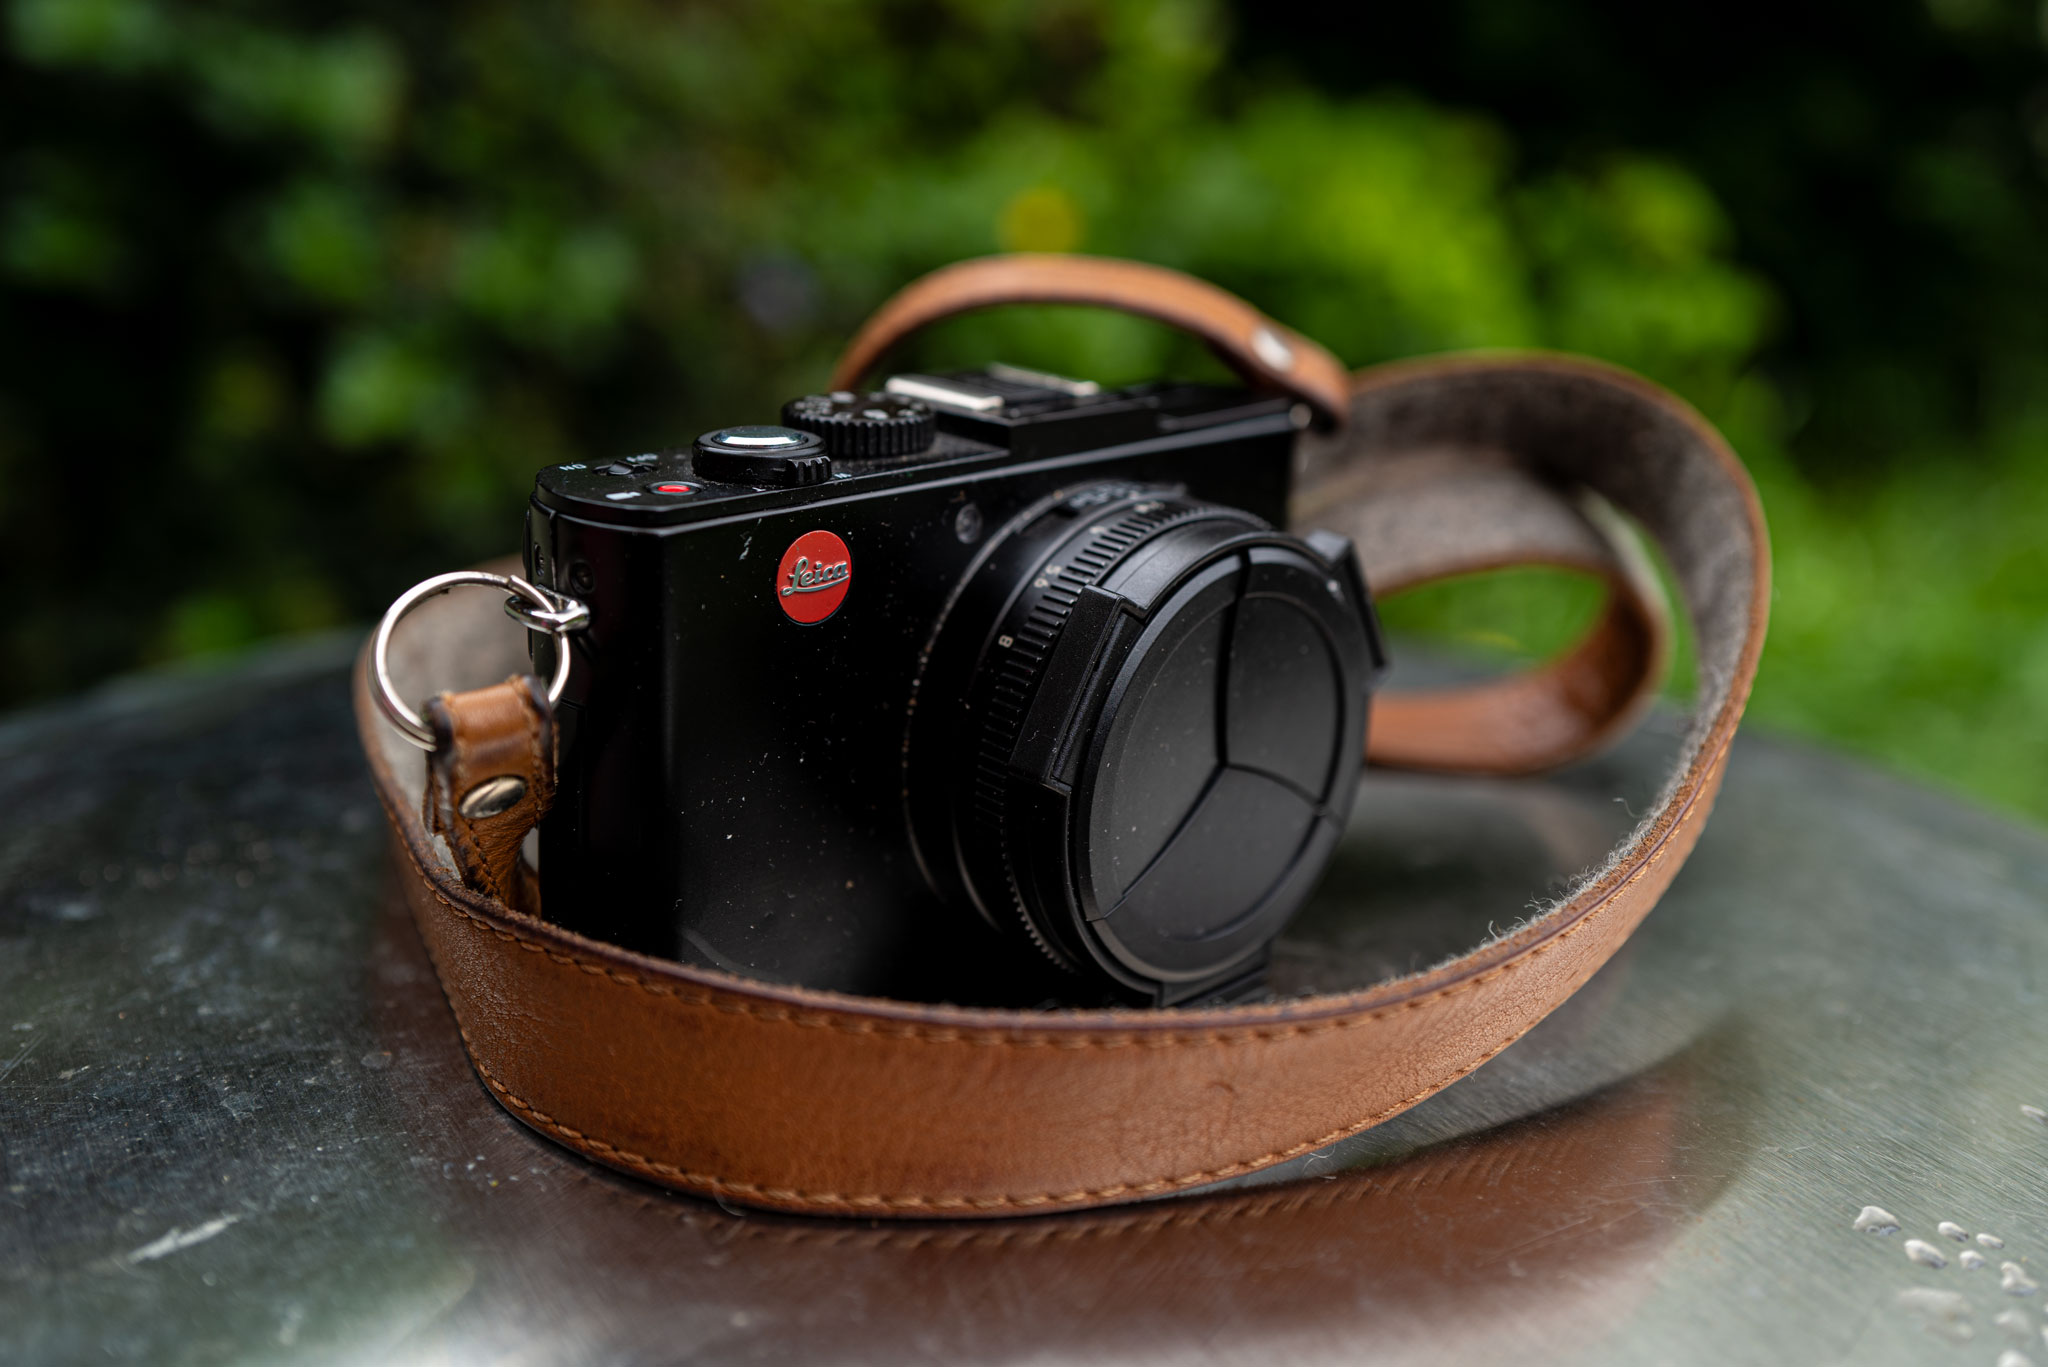 Close up view of the Leica D Lux 6